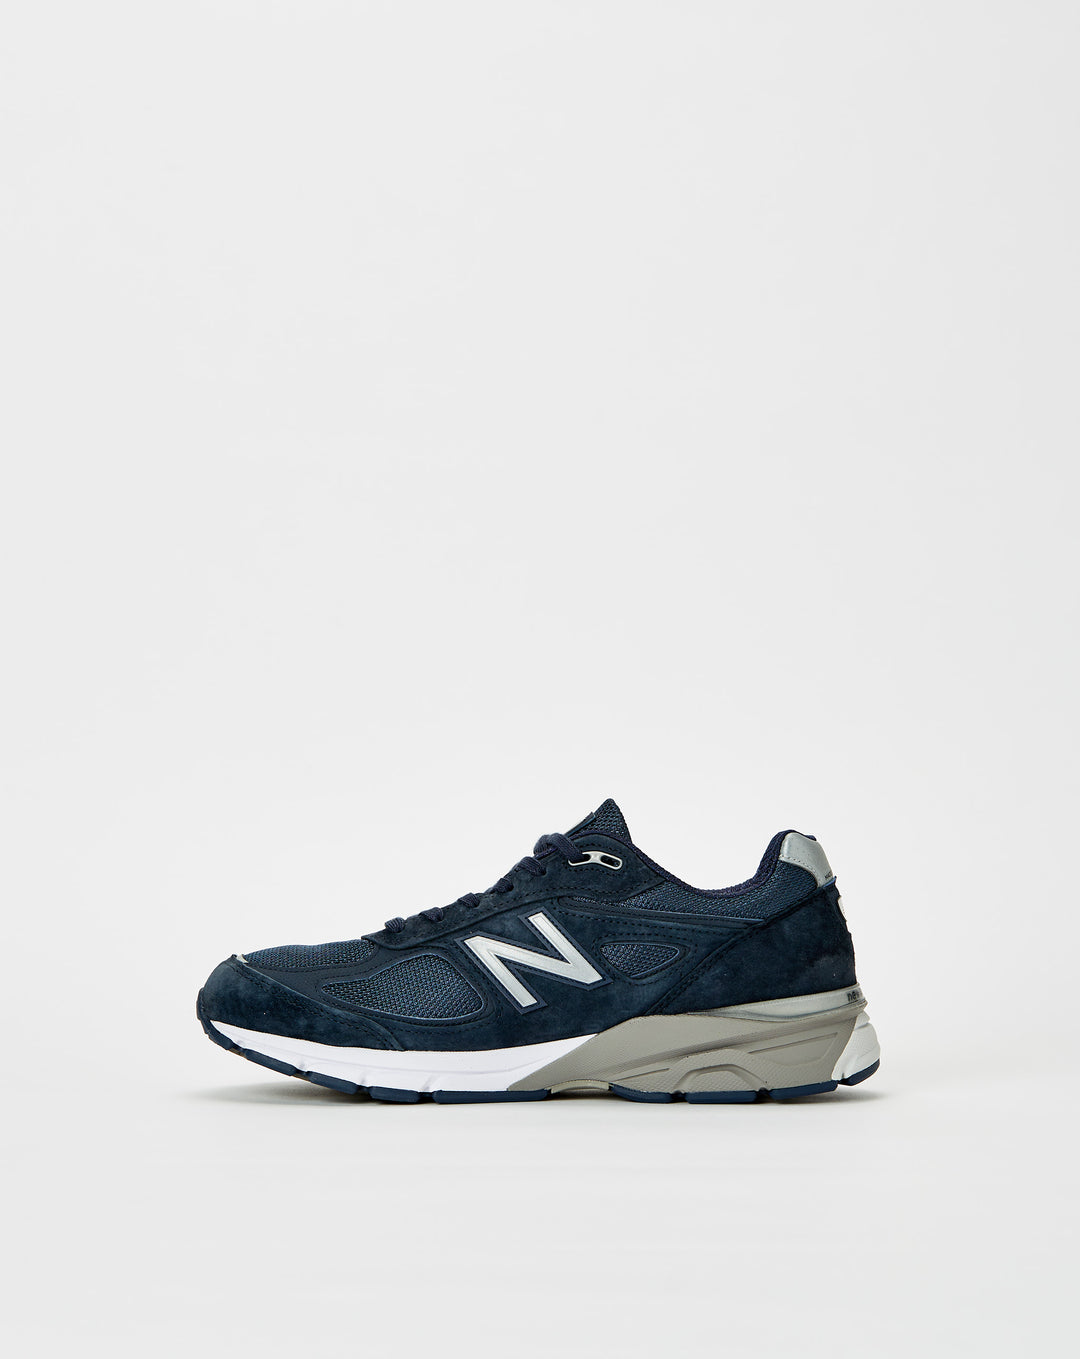 New Balance Made in USA 990v4  - Cheap Atelier-lumieres Jordan outlet